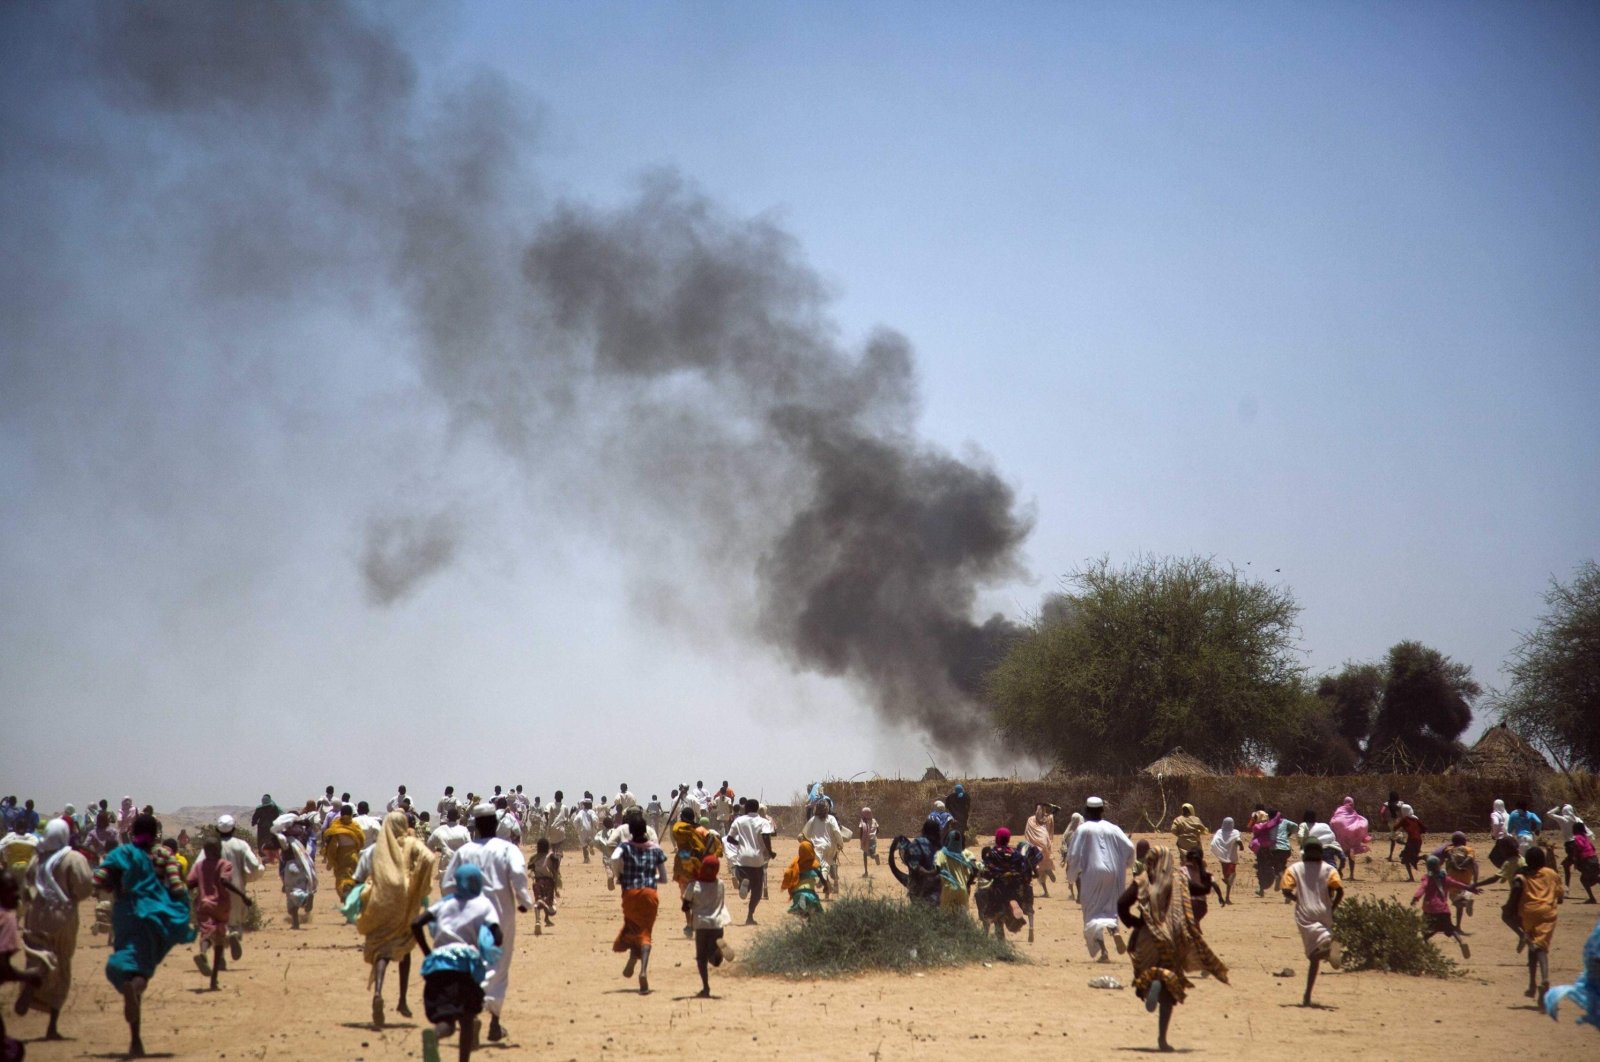 Villagers run away with their belongings from a fire in Kuma Garadayat, a village located in North Darfur, Sudan, May 19, 2011. (Reuters File Photo)